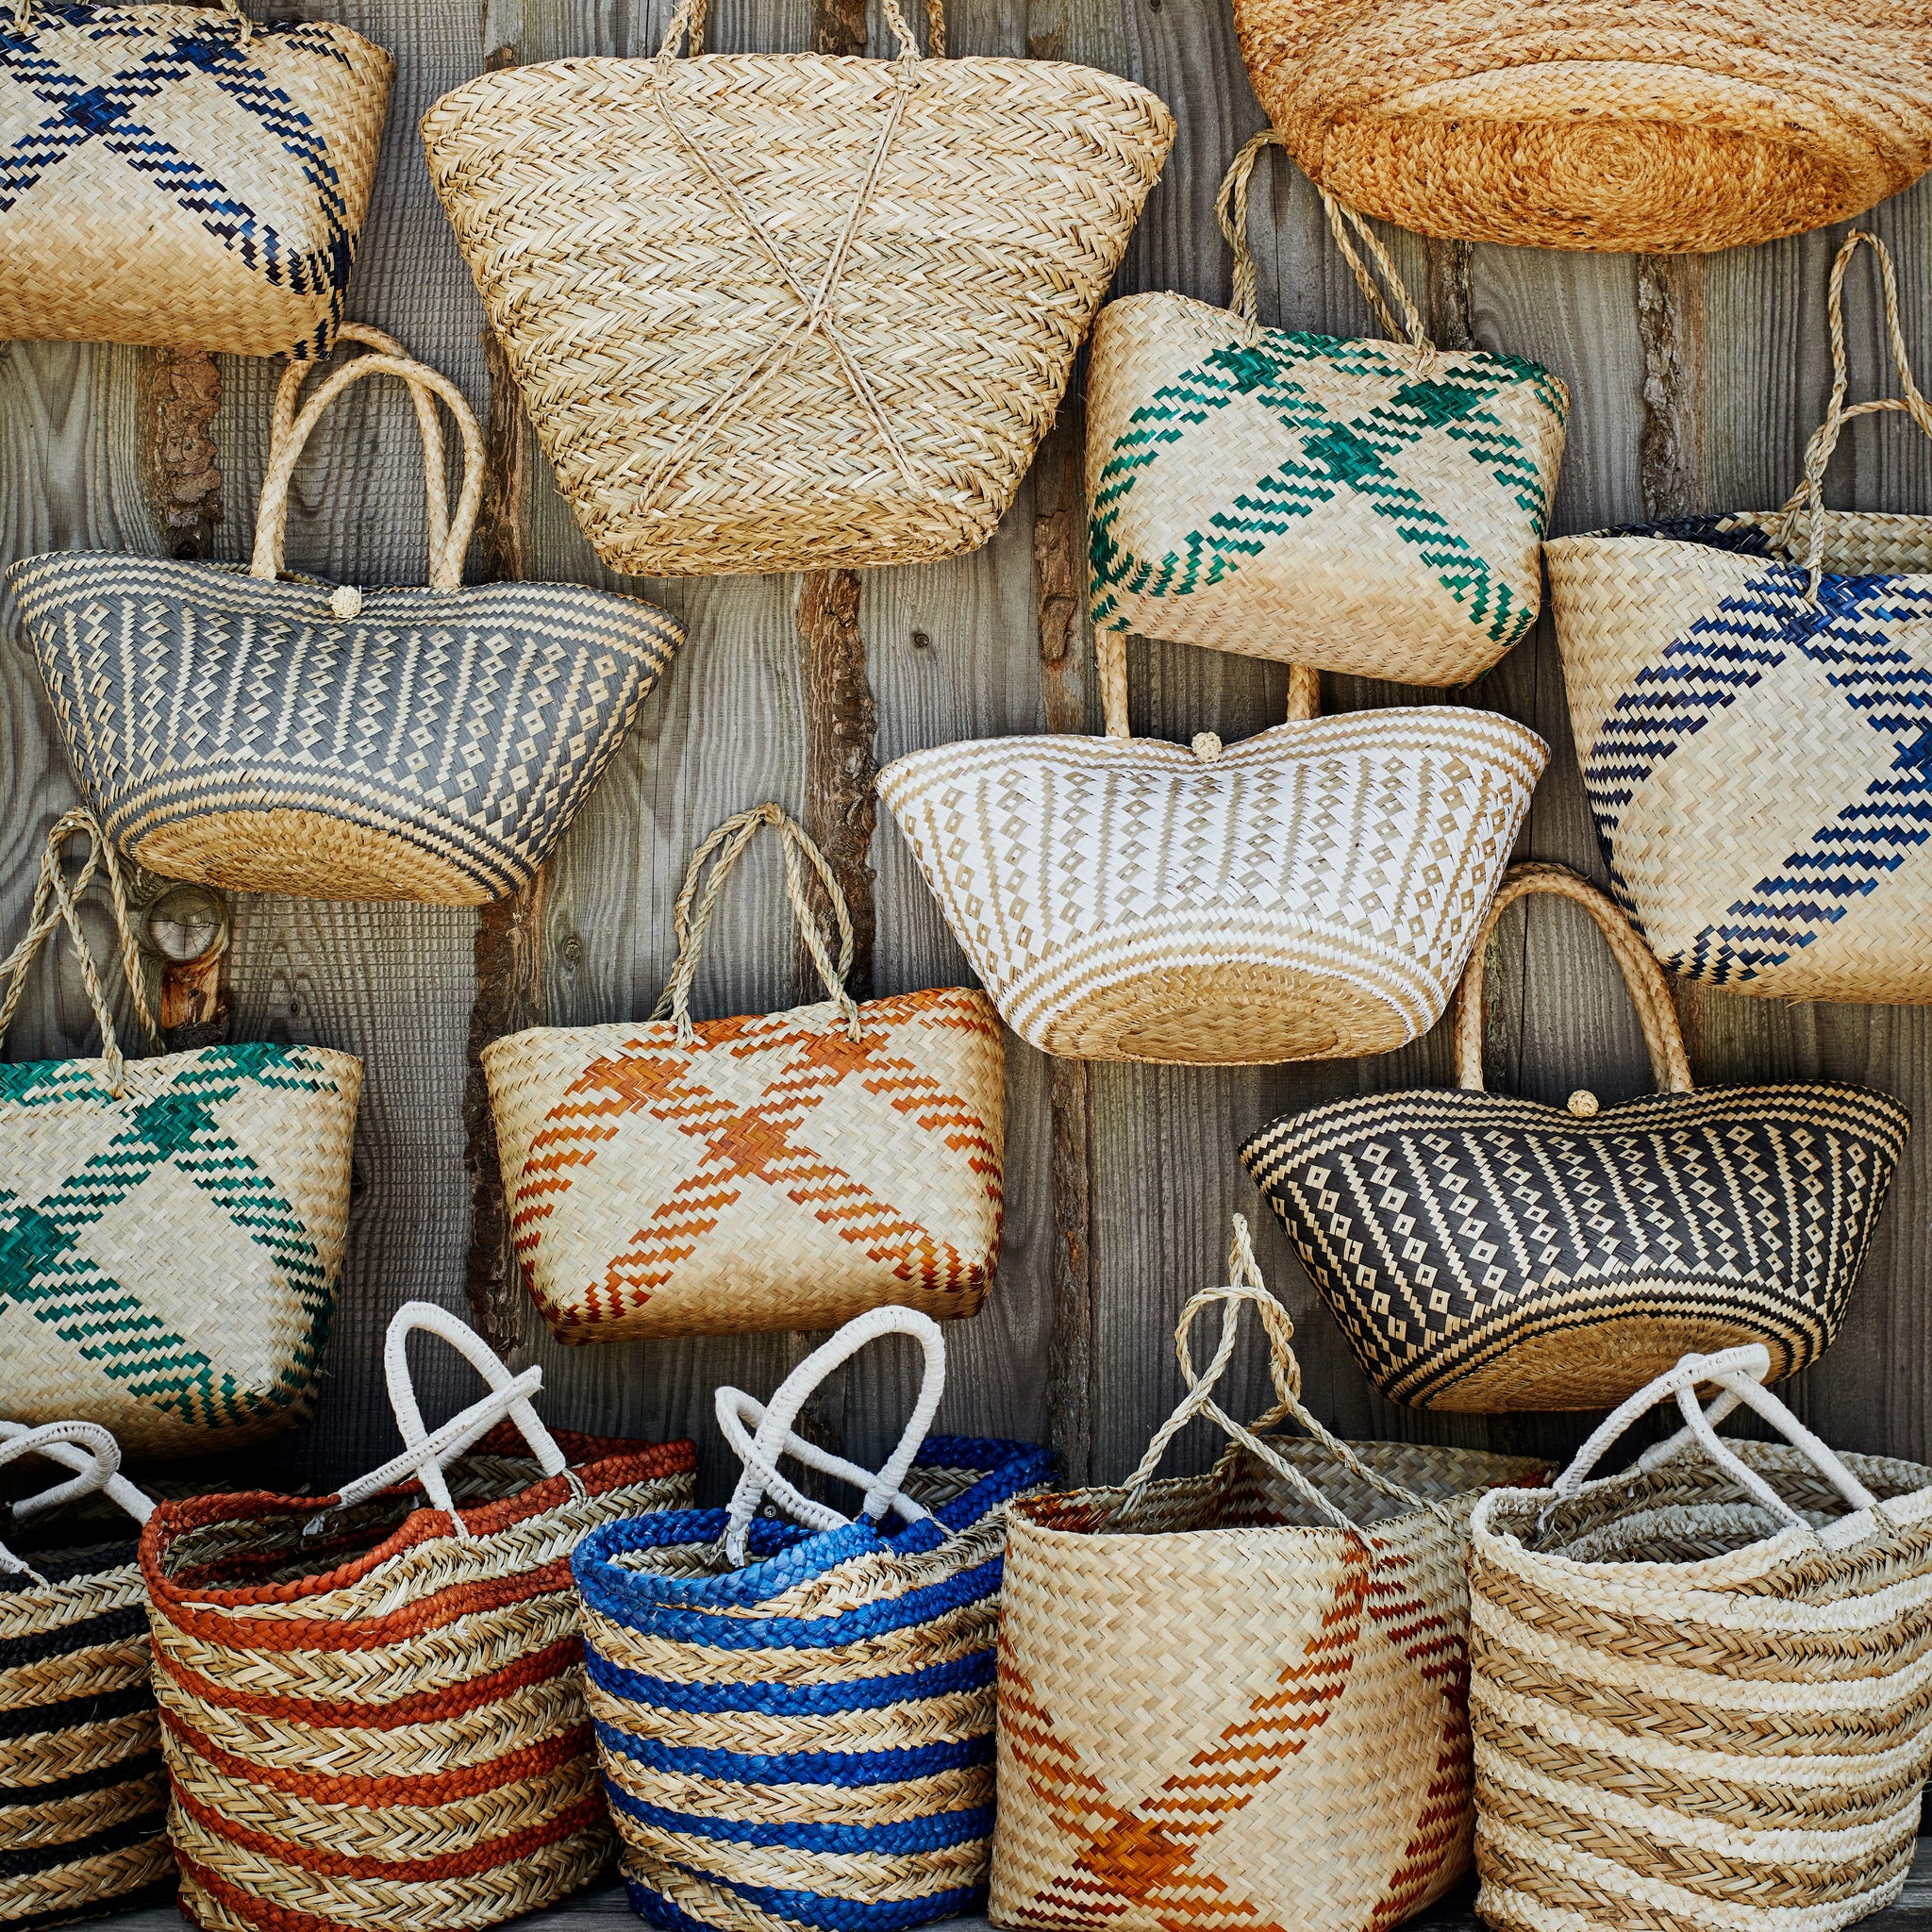 https://theforestandco.com/collections/new-in/products/colourful-stripped-seagrass-baskets-with-handles-pre-order-march